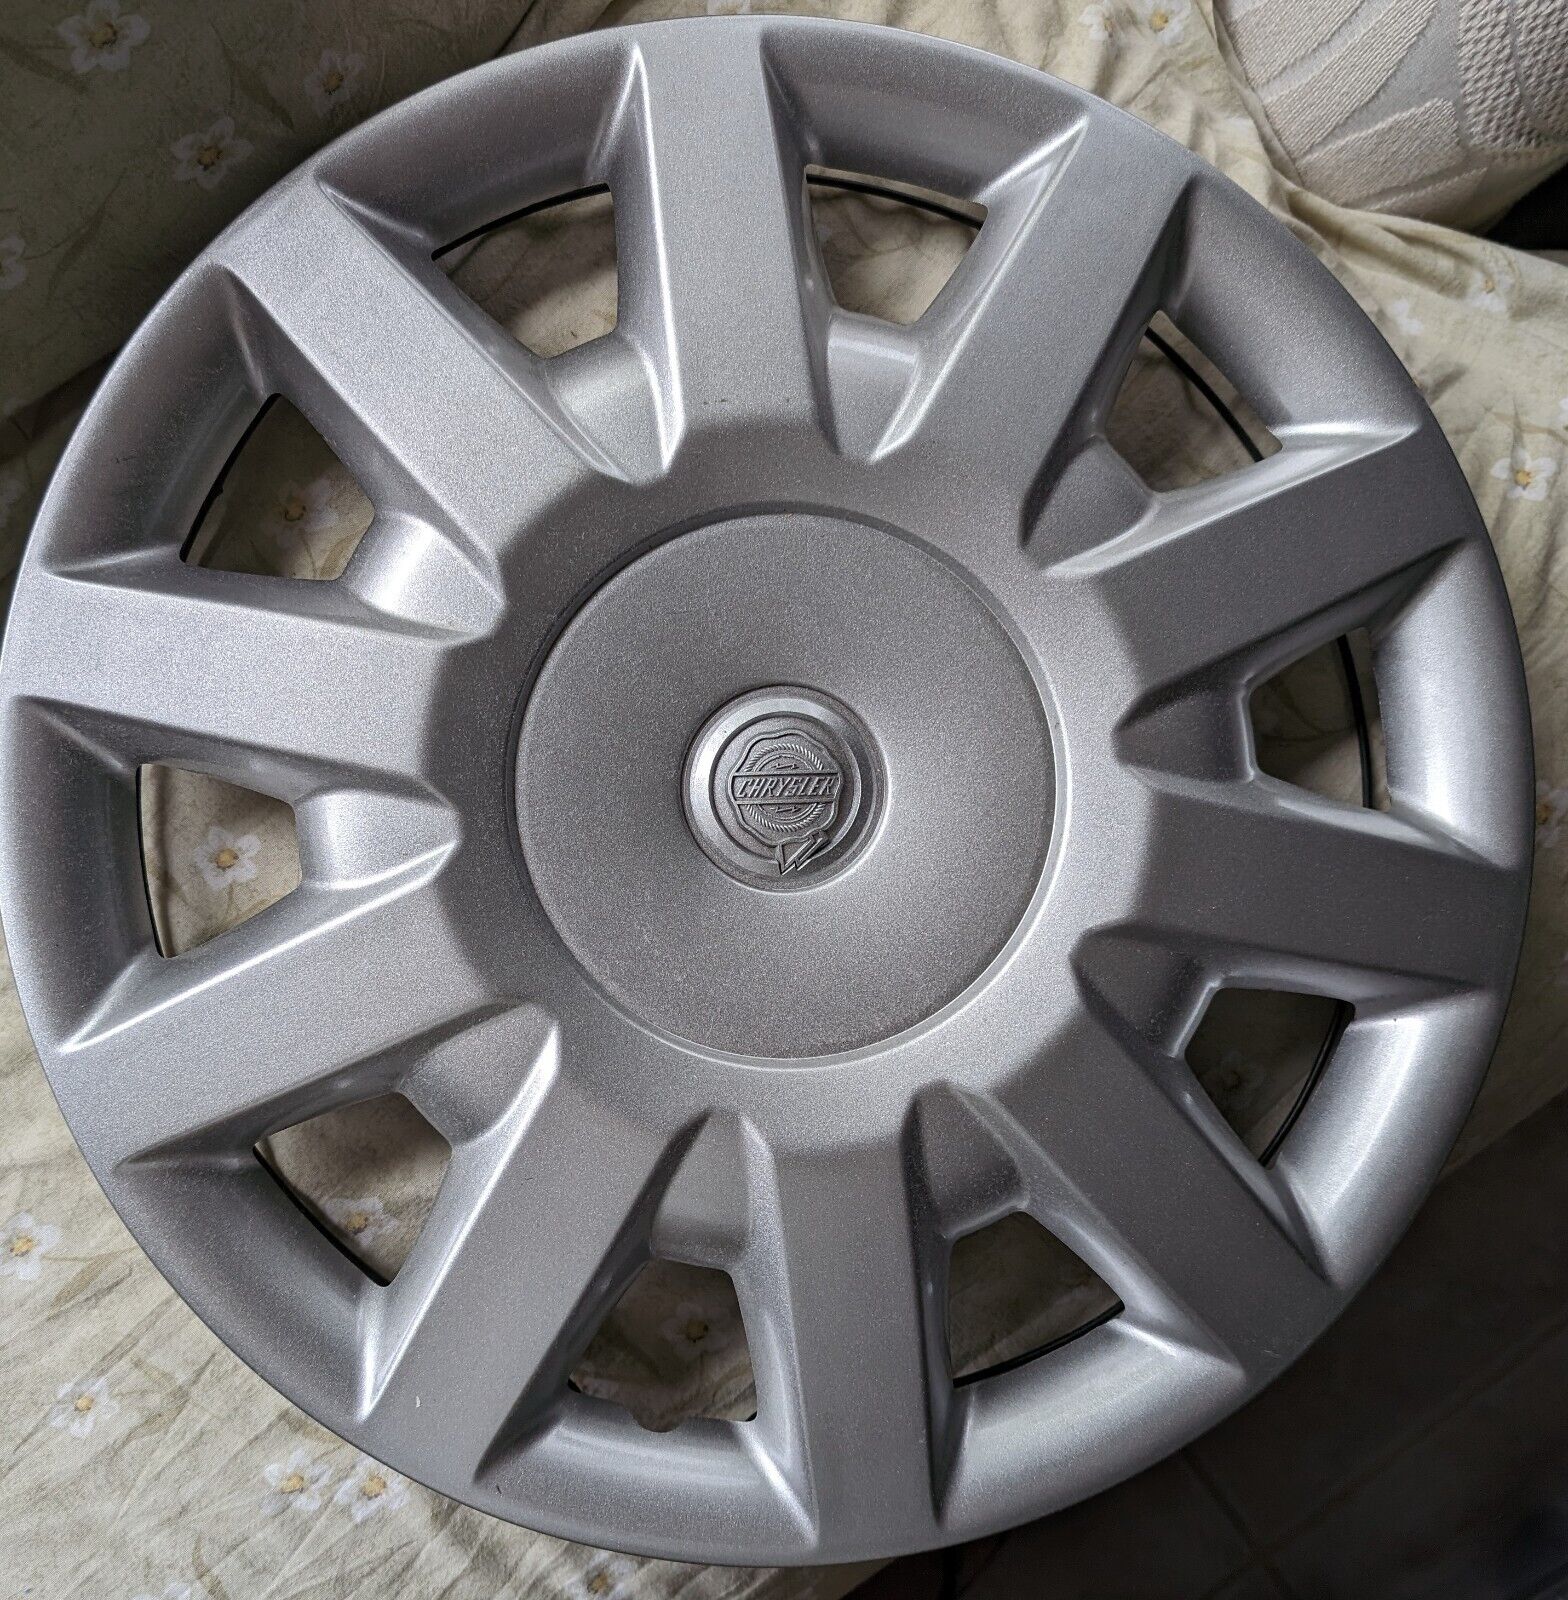 15 Inch Wheel Covers for Chrysler Silver